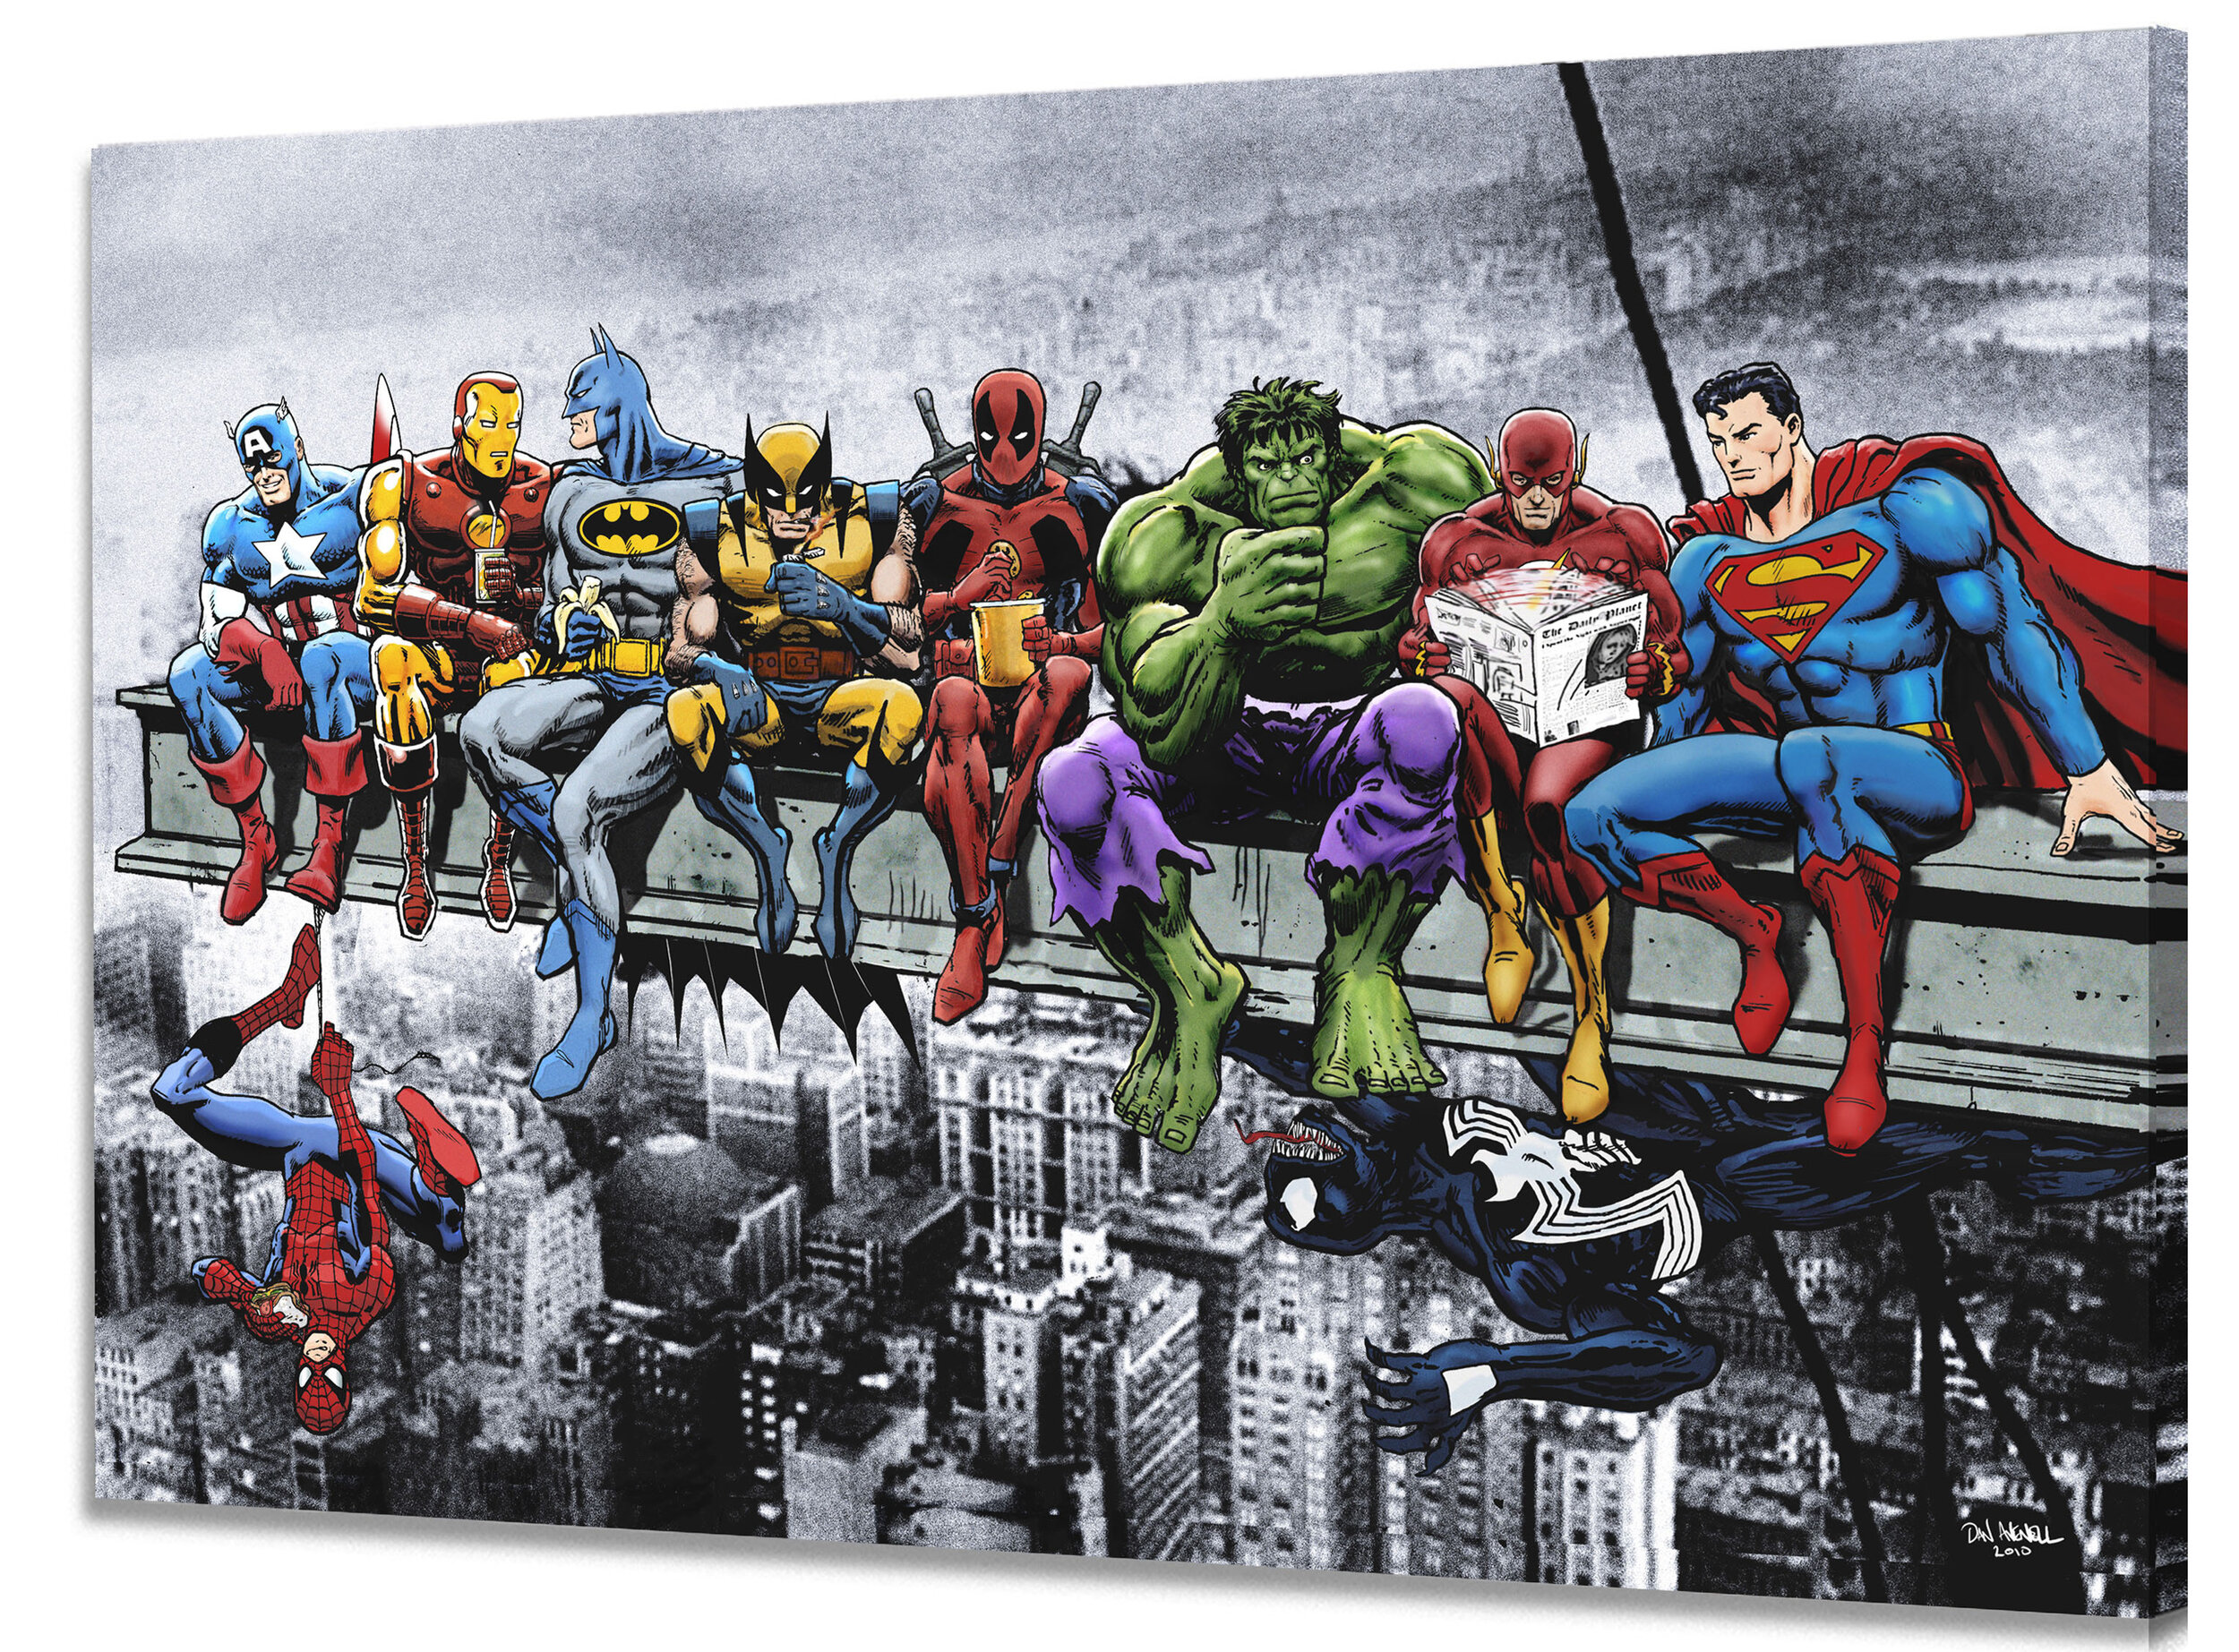 MARVEL SUPERHEROES CHARACTERS PHOTO/PICTURE PRINT ON FRAMED CANVAS WALL ART 